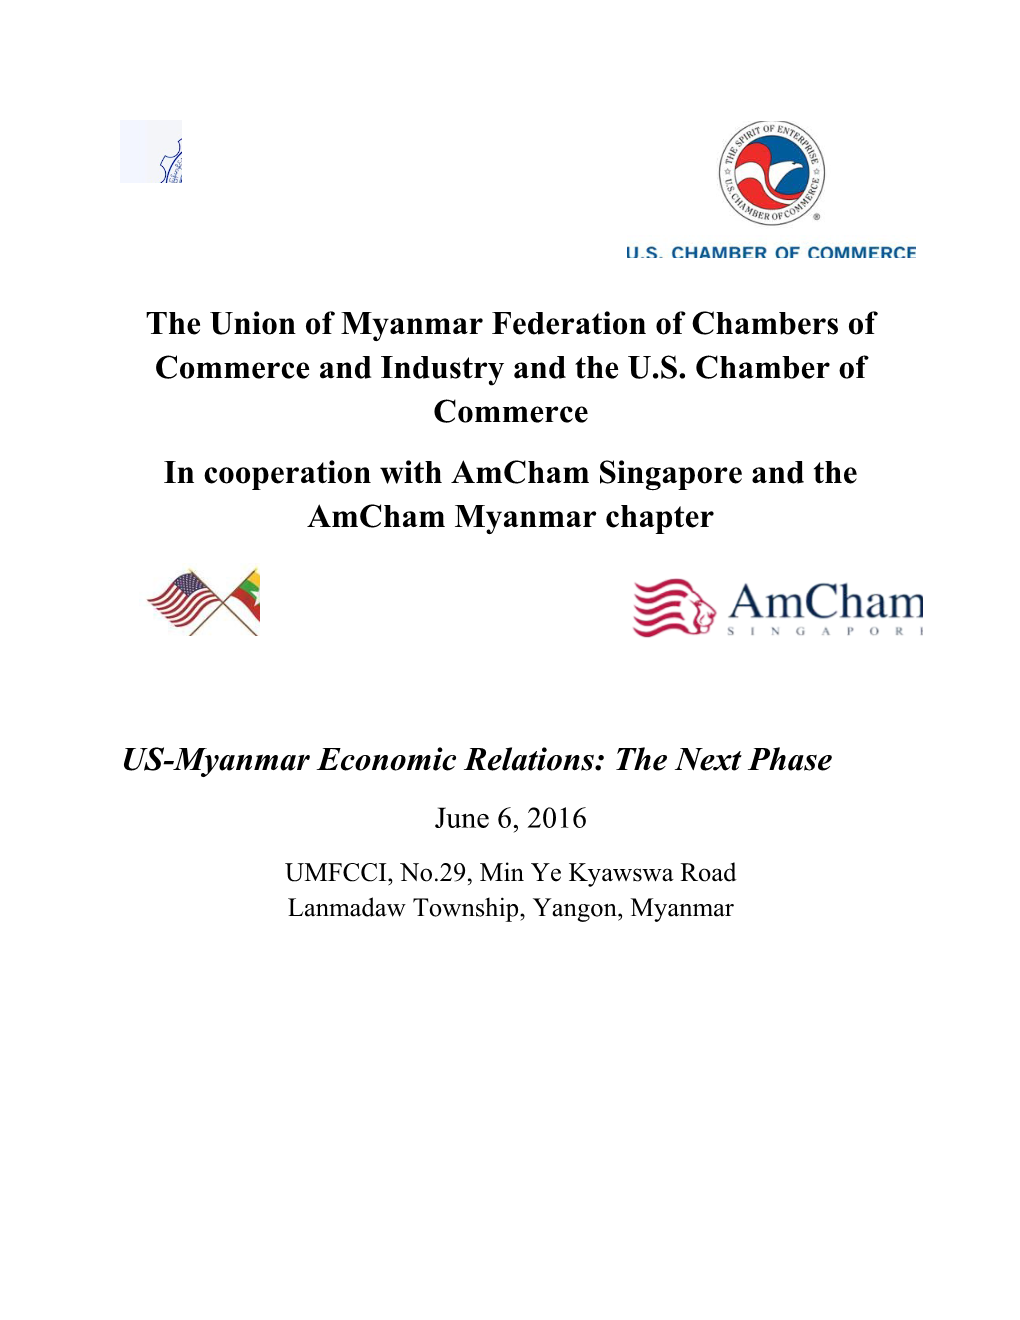 In Cooperation with Amcham Singapore and the Amcham Myanmar Chapter